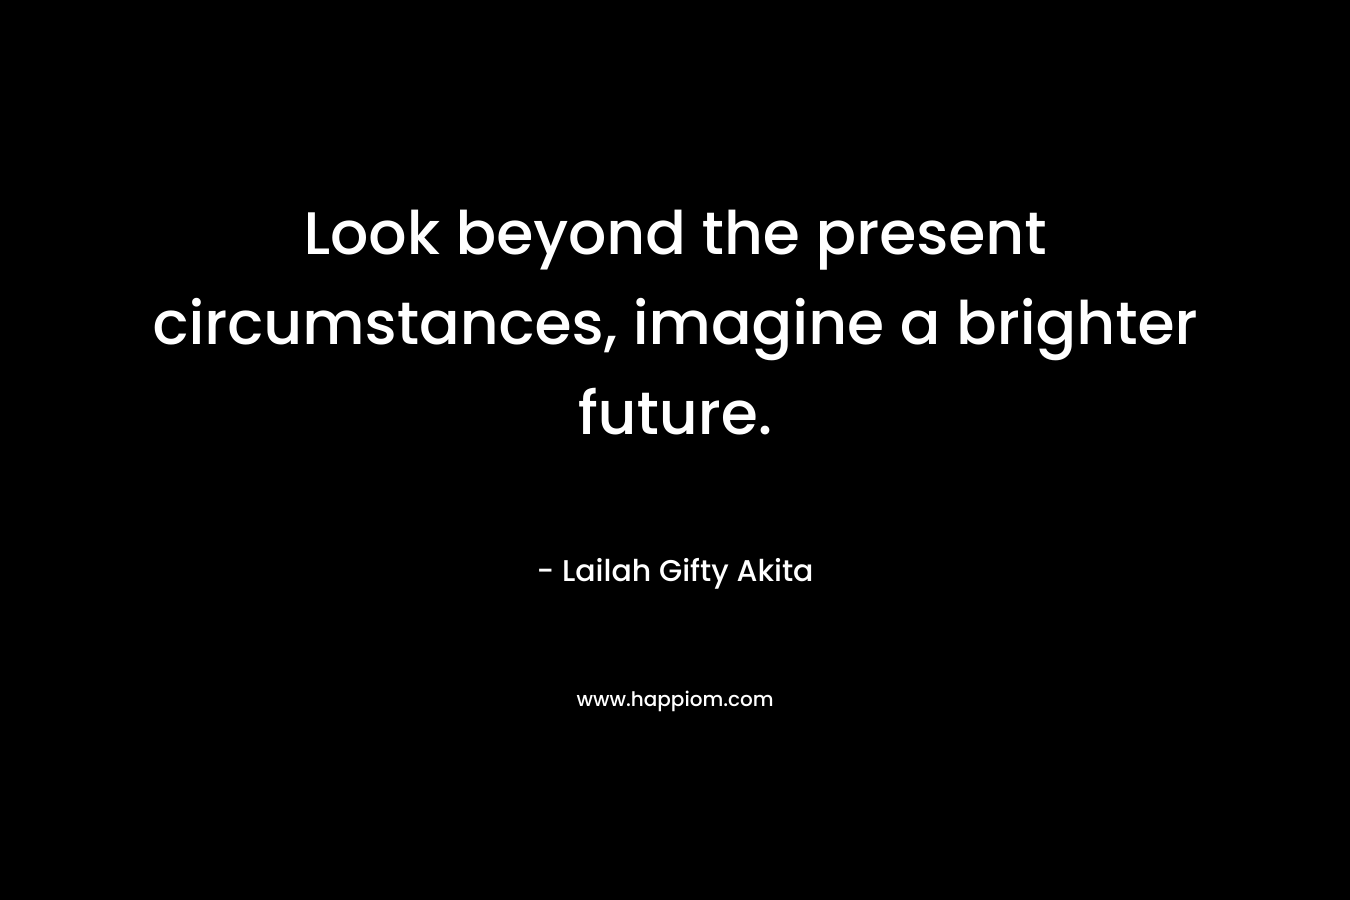 Look beyond the present circumstances, imagine a brighter future.